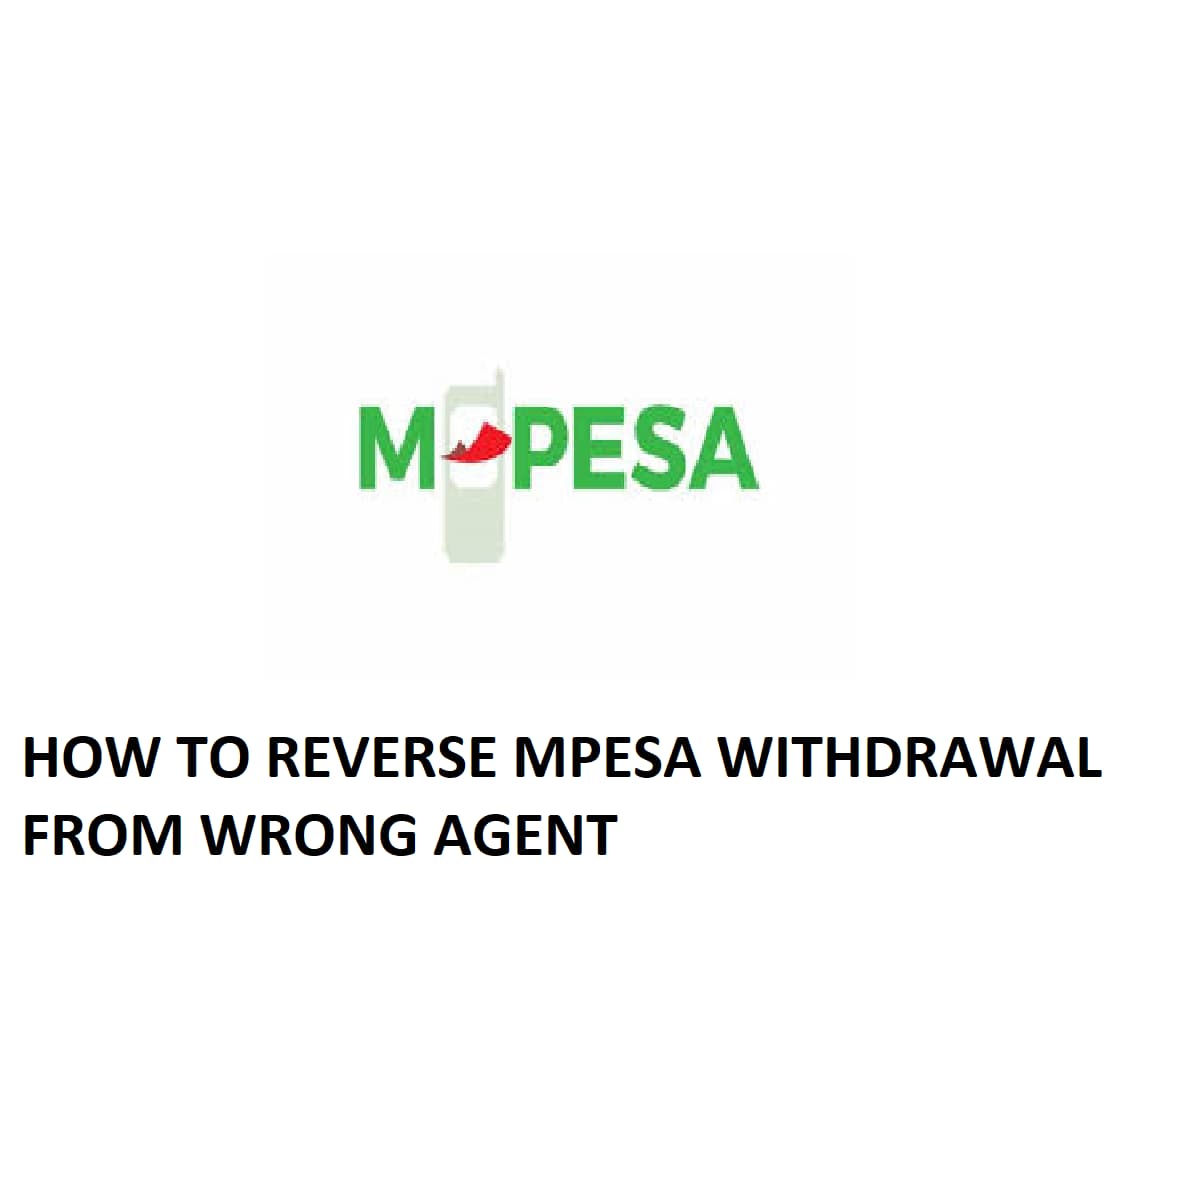 How to Reverse Mpesa Withdrawal from Wrong Agent